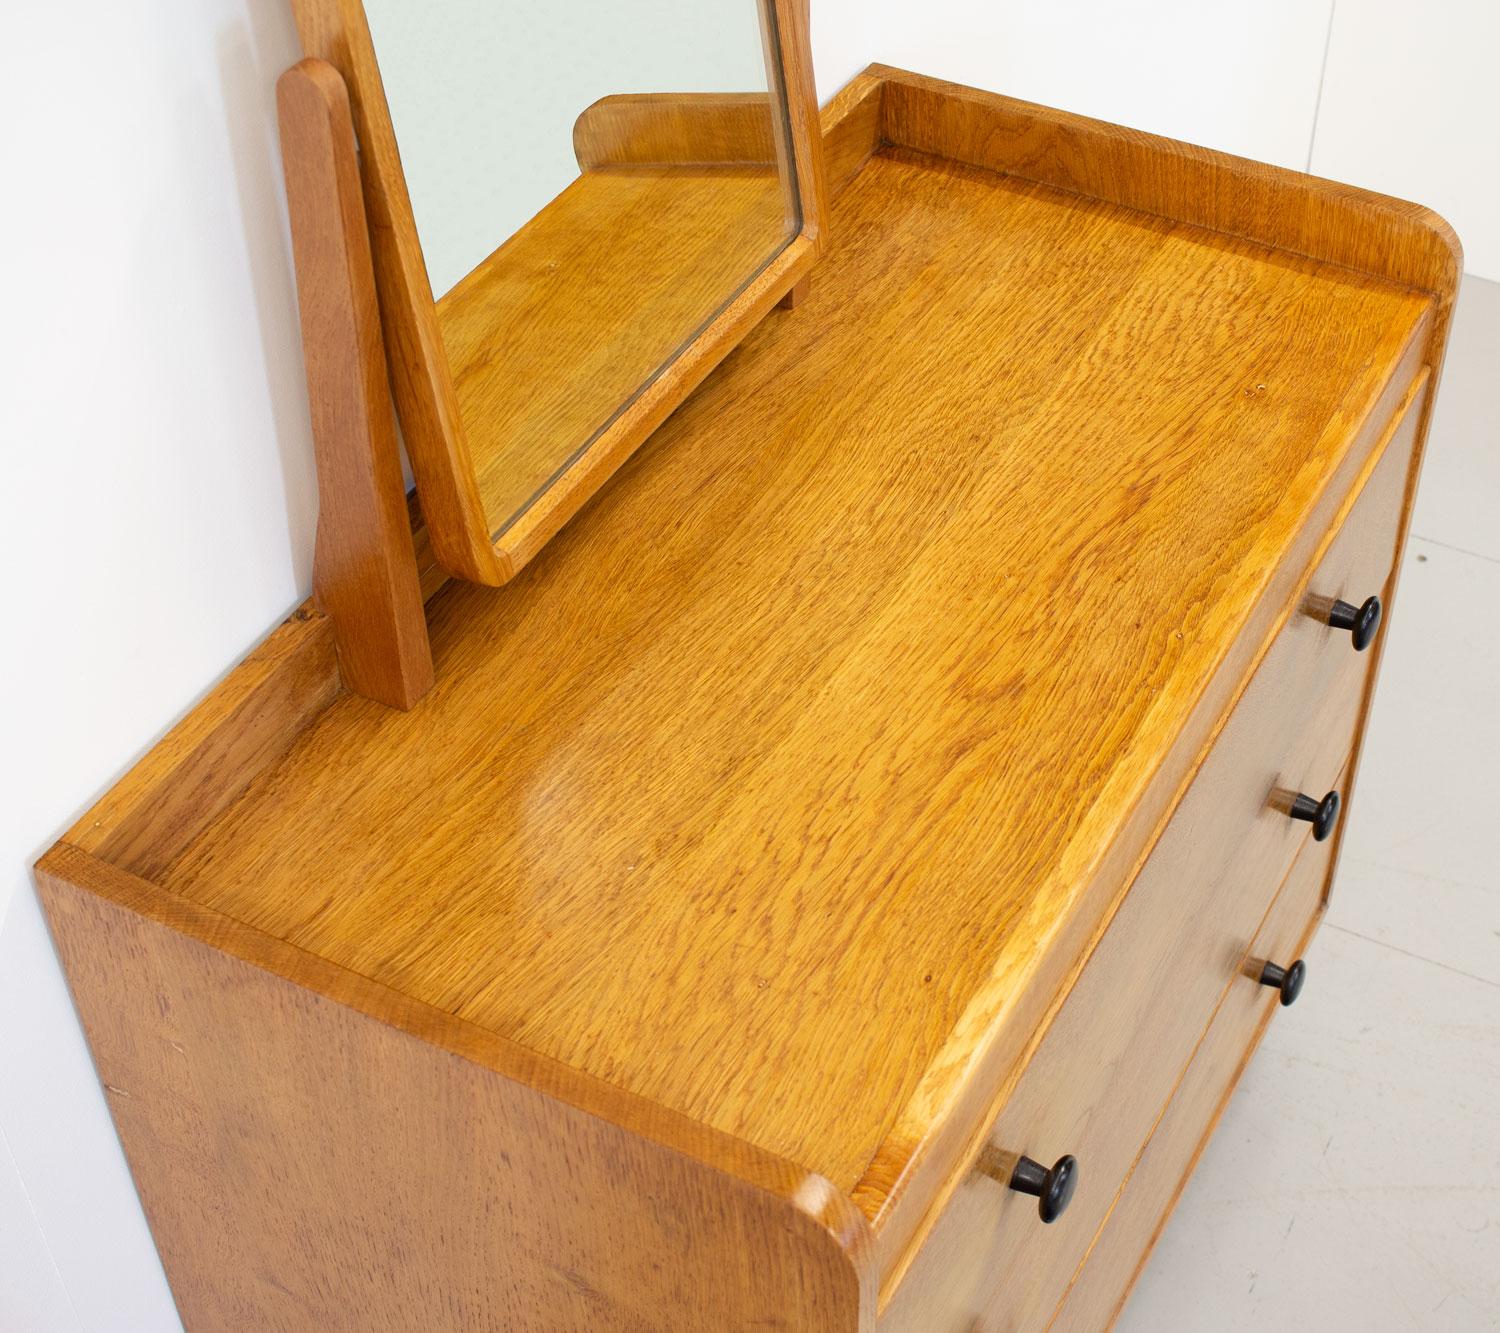 Modernist Art Deco style oak dressing table designed by David Booth in 1949 for Gordon Russell. As well as Gordon Russell being one of the leading UK designers and manufacturers during the early to mid 20th century he also nurtured many other young